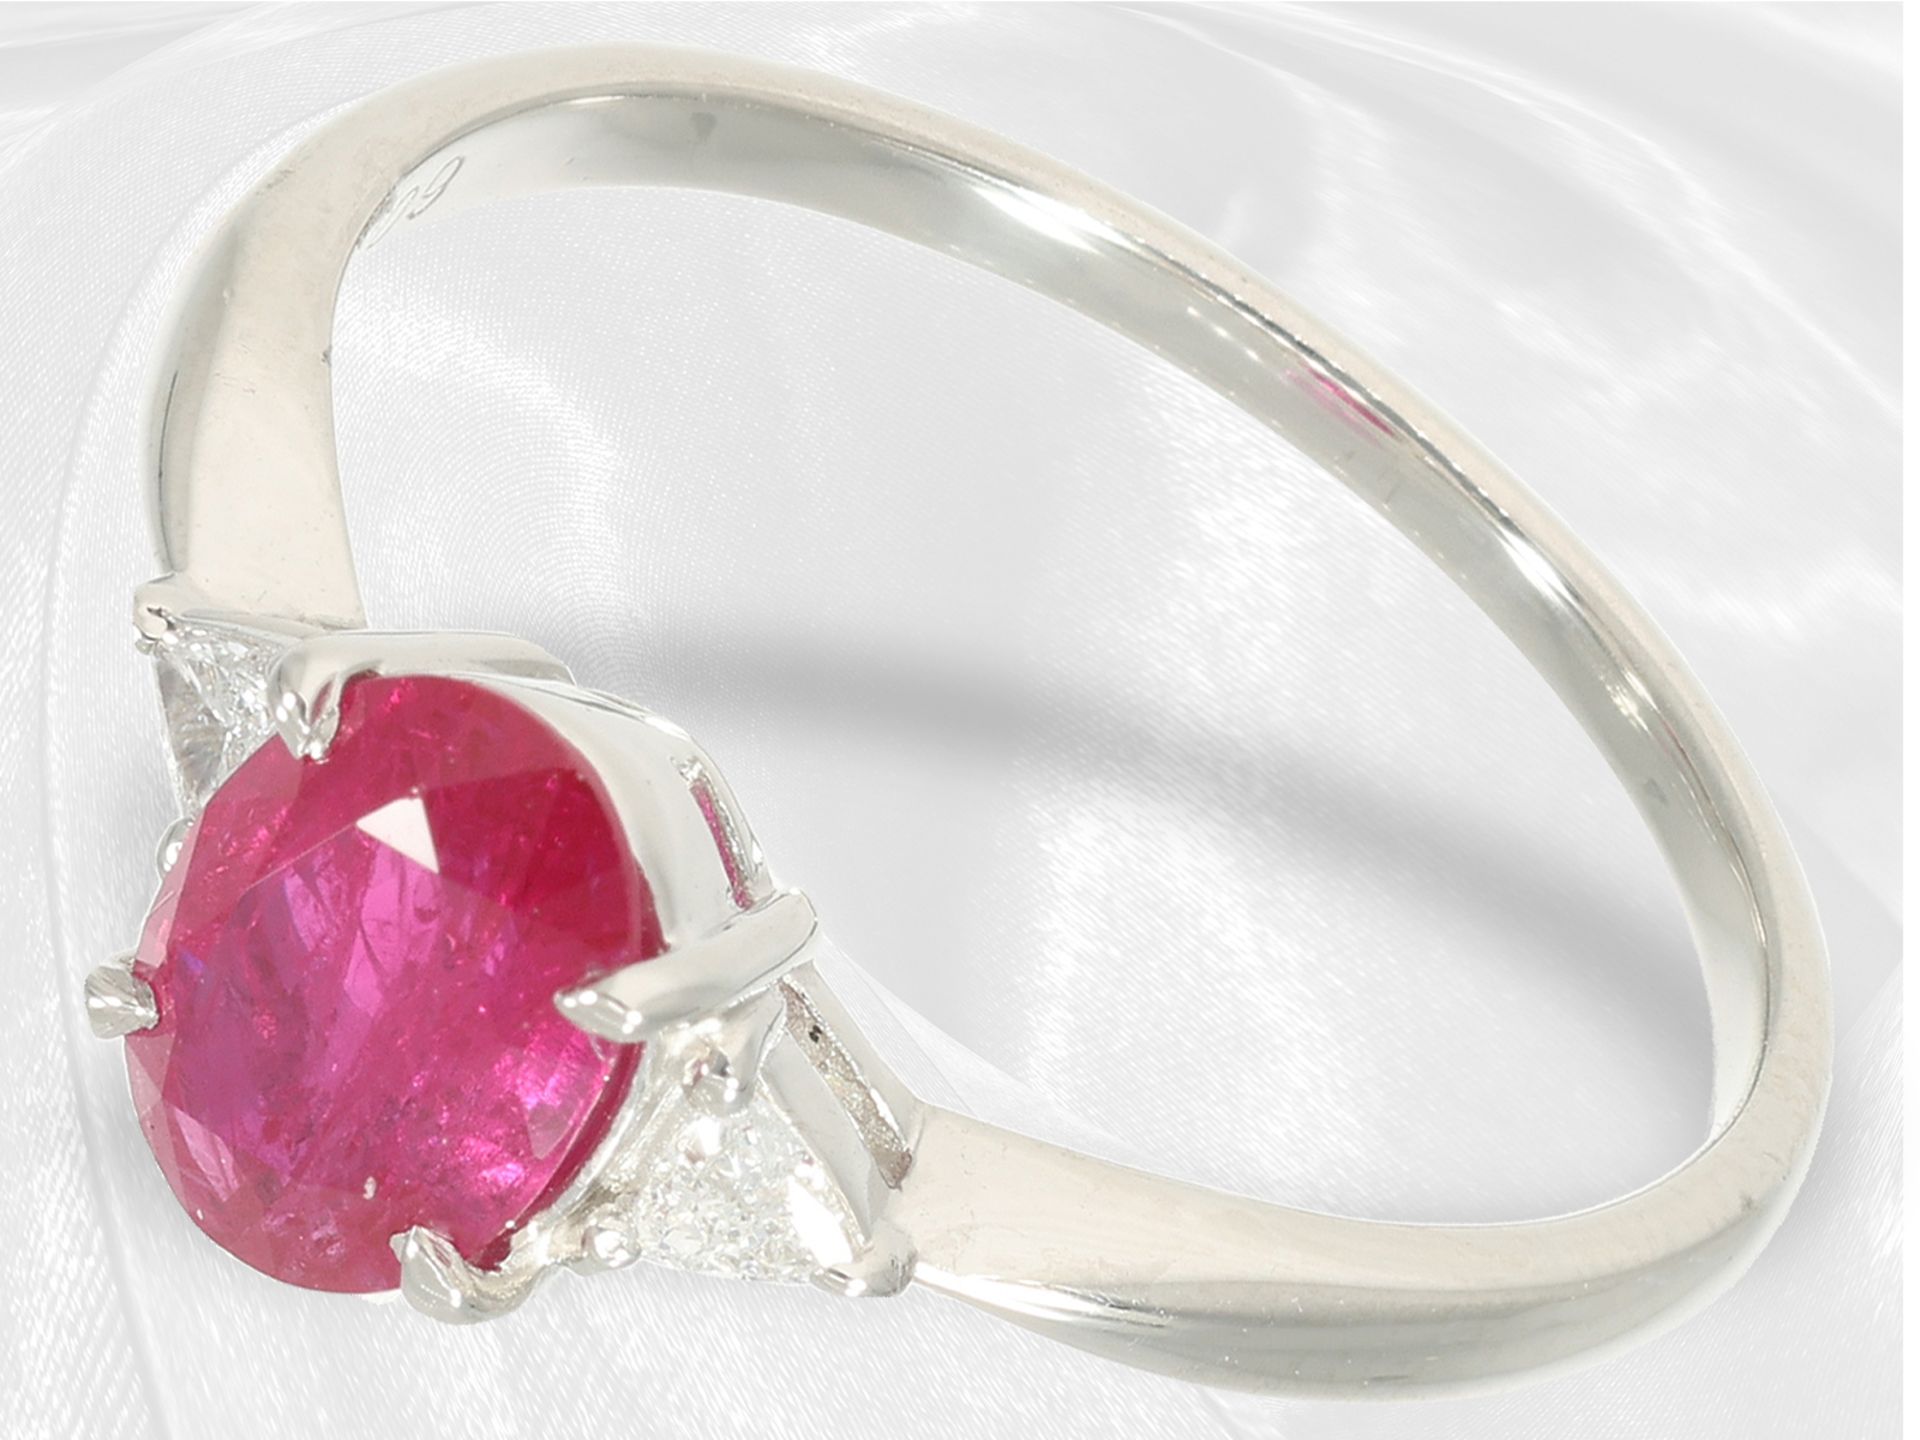 Ring: elegant platinum ring with very beautiful 1ct ruby